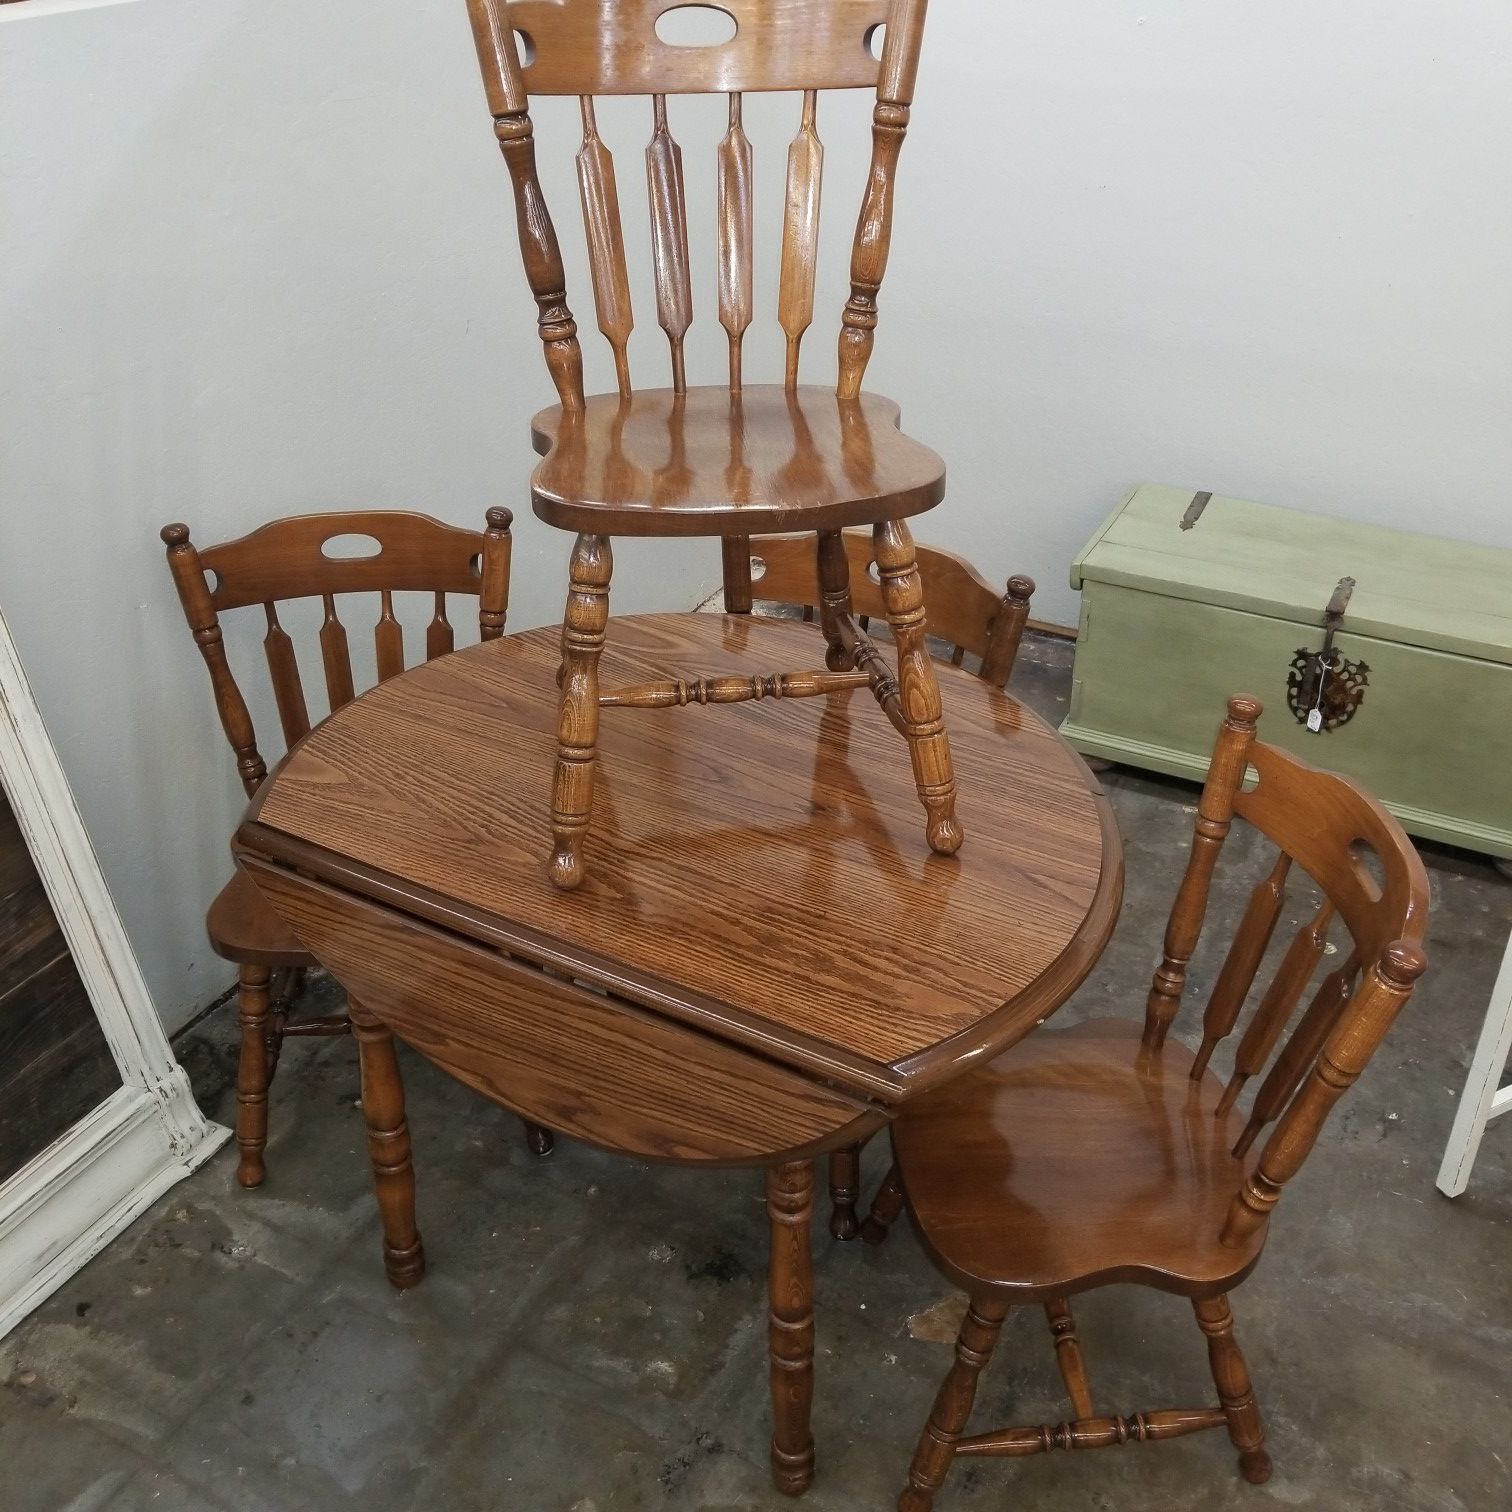 Vintage 5-piece Farmhouse Drop-Leaf Dining Room Set (table w/ 4 chairs)